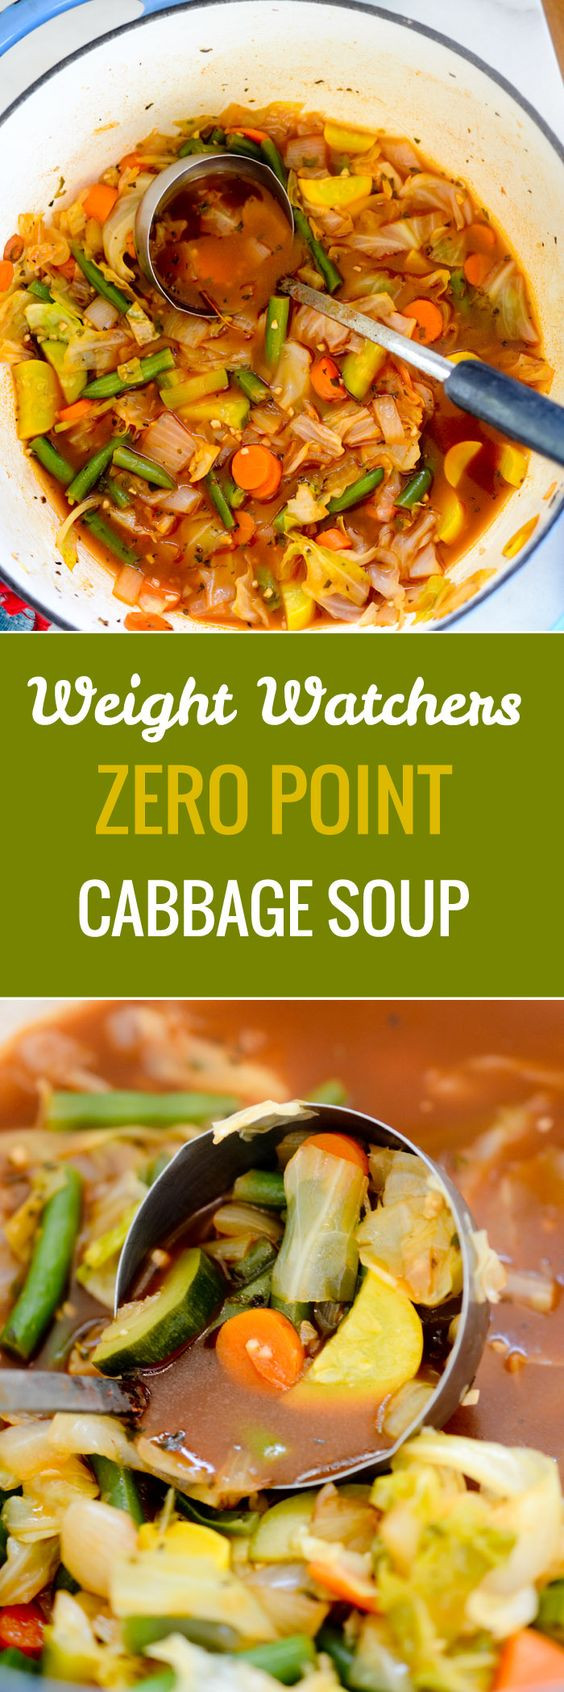 Weight Watchers Cabbage Soup With Ground Beef
 Cabbages Ground beef and Ve ables on Pinterest